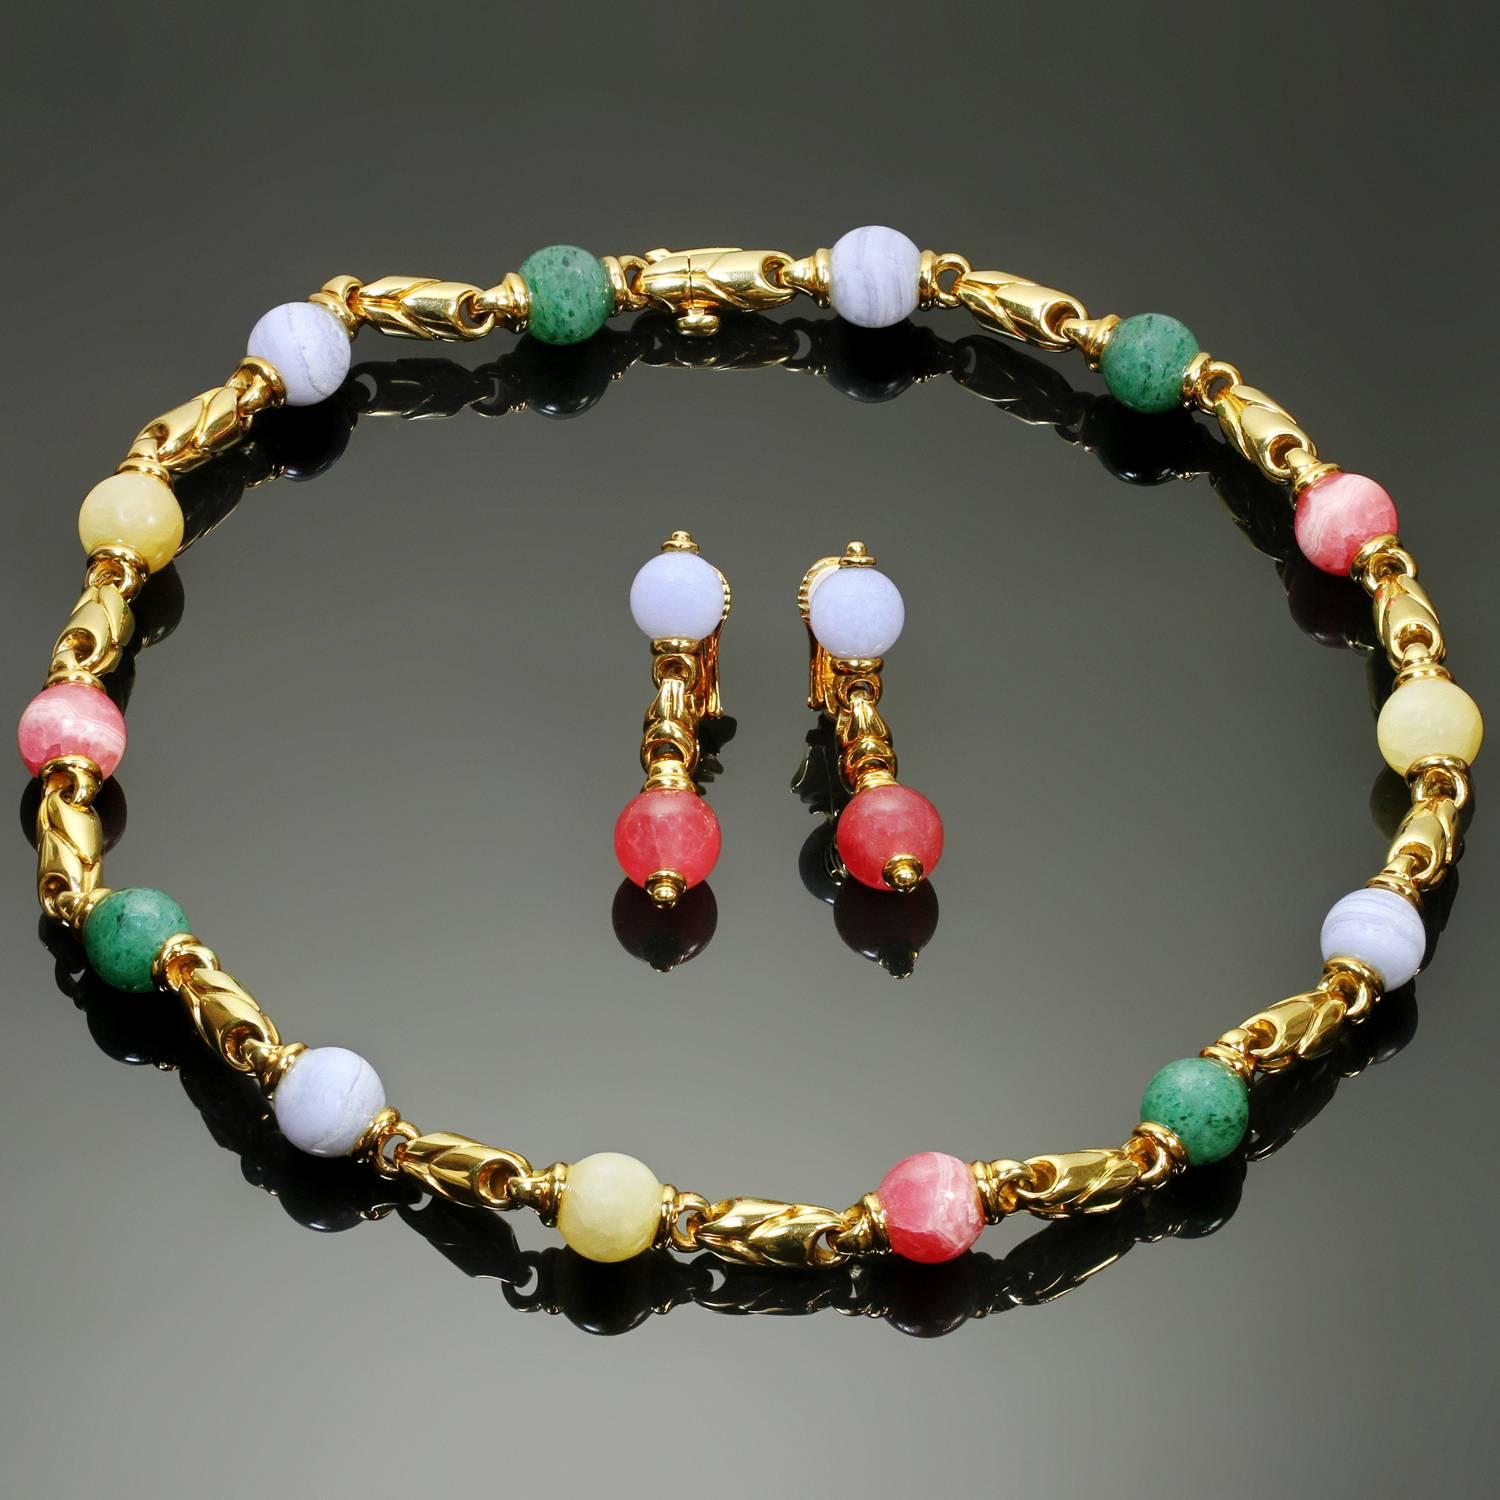 This gorgeous Bulgari jewelry set features a link necklace with a matching pair of drop earrings crafted in 18k yellow gold and set with vibrant gemstone beads made of chalcedony, rhodochrosite, and aventurine quartz. Made in Italy circa 1990s.